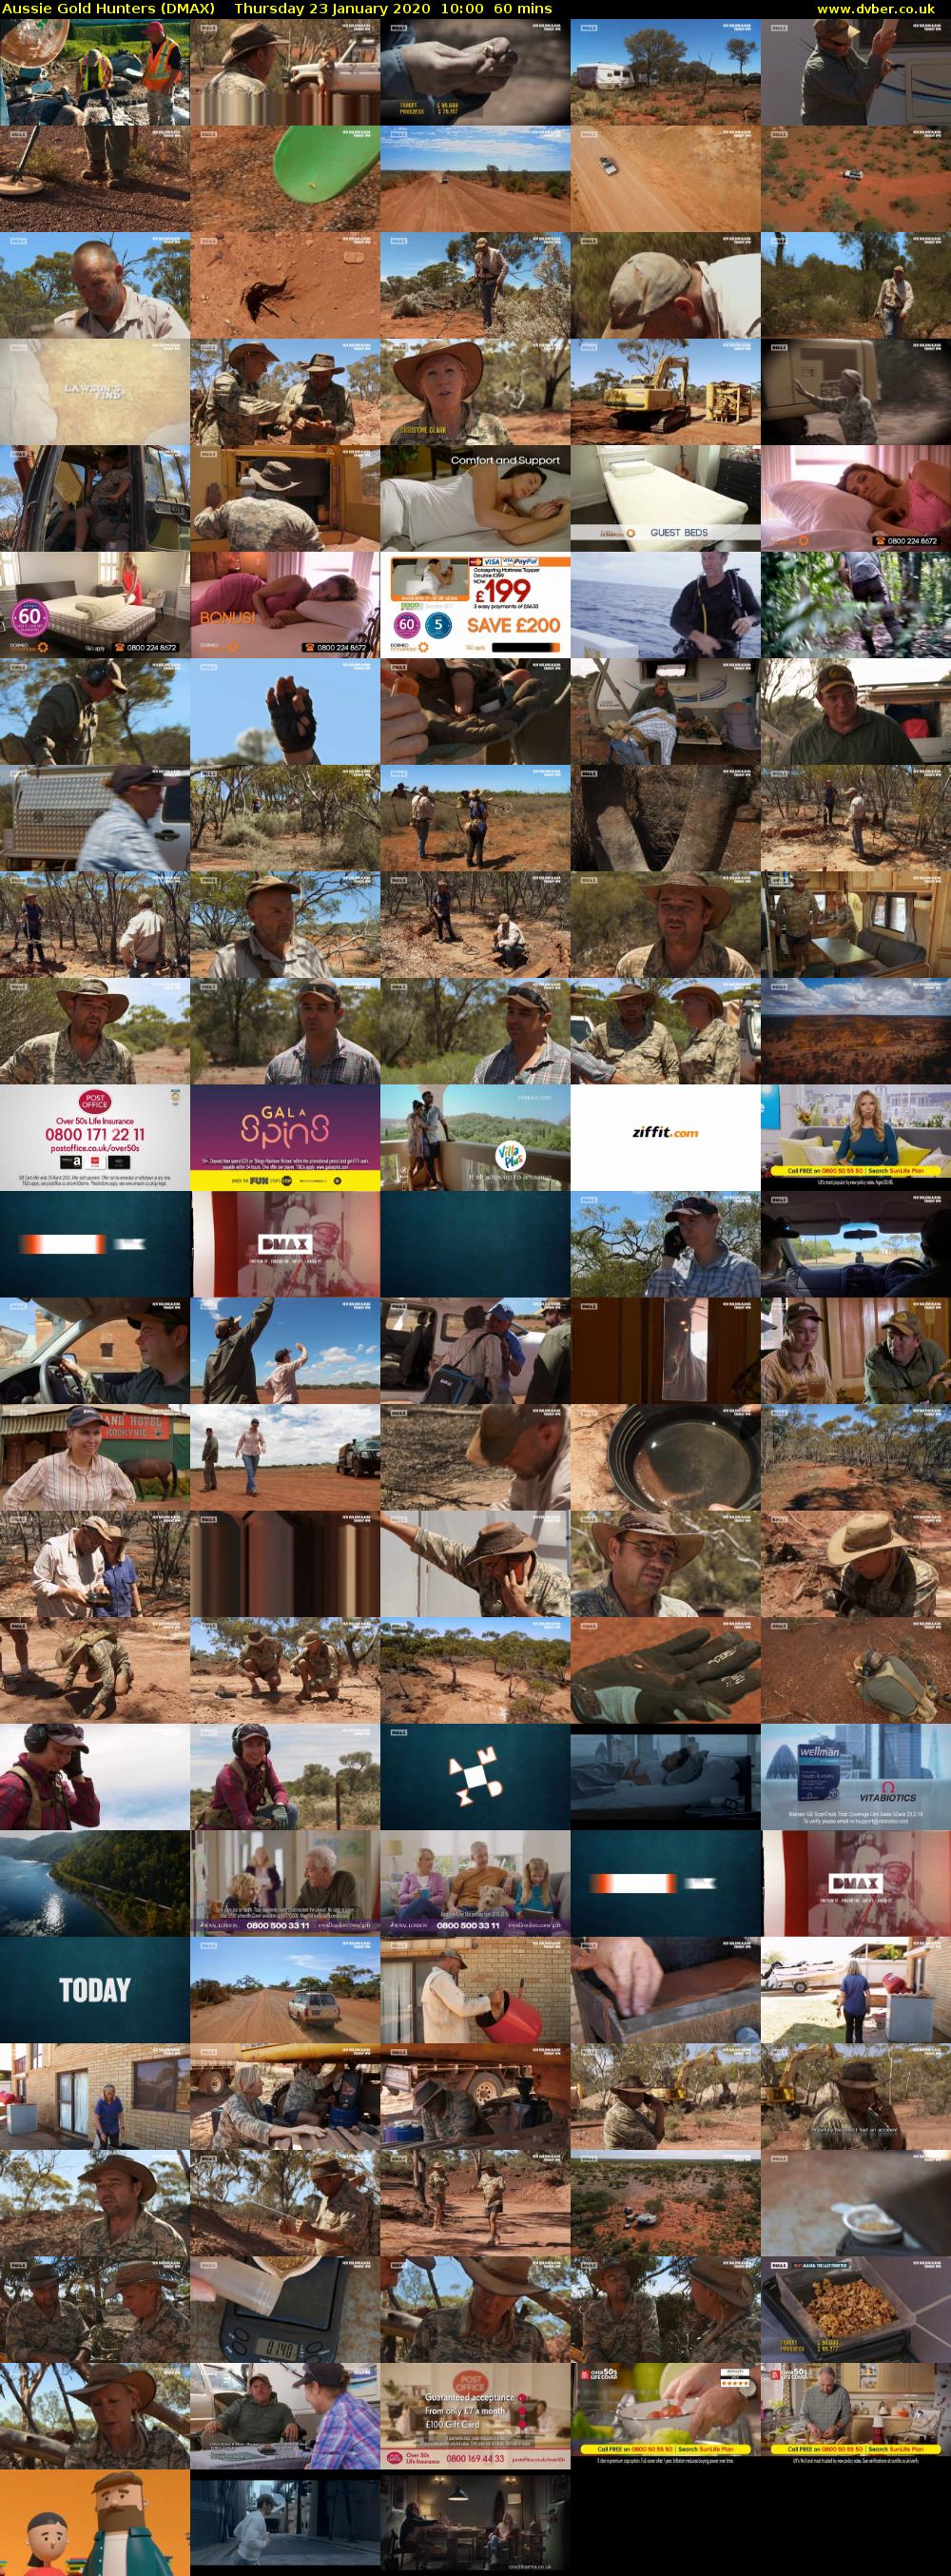 Aussie Gold Hunters (DMAX) Thursday 23 January 2020 10:00 - 11:00